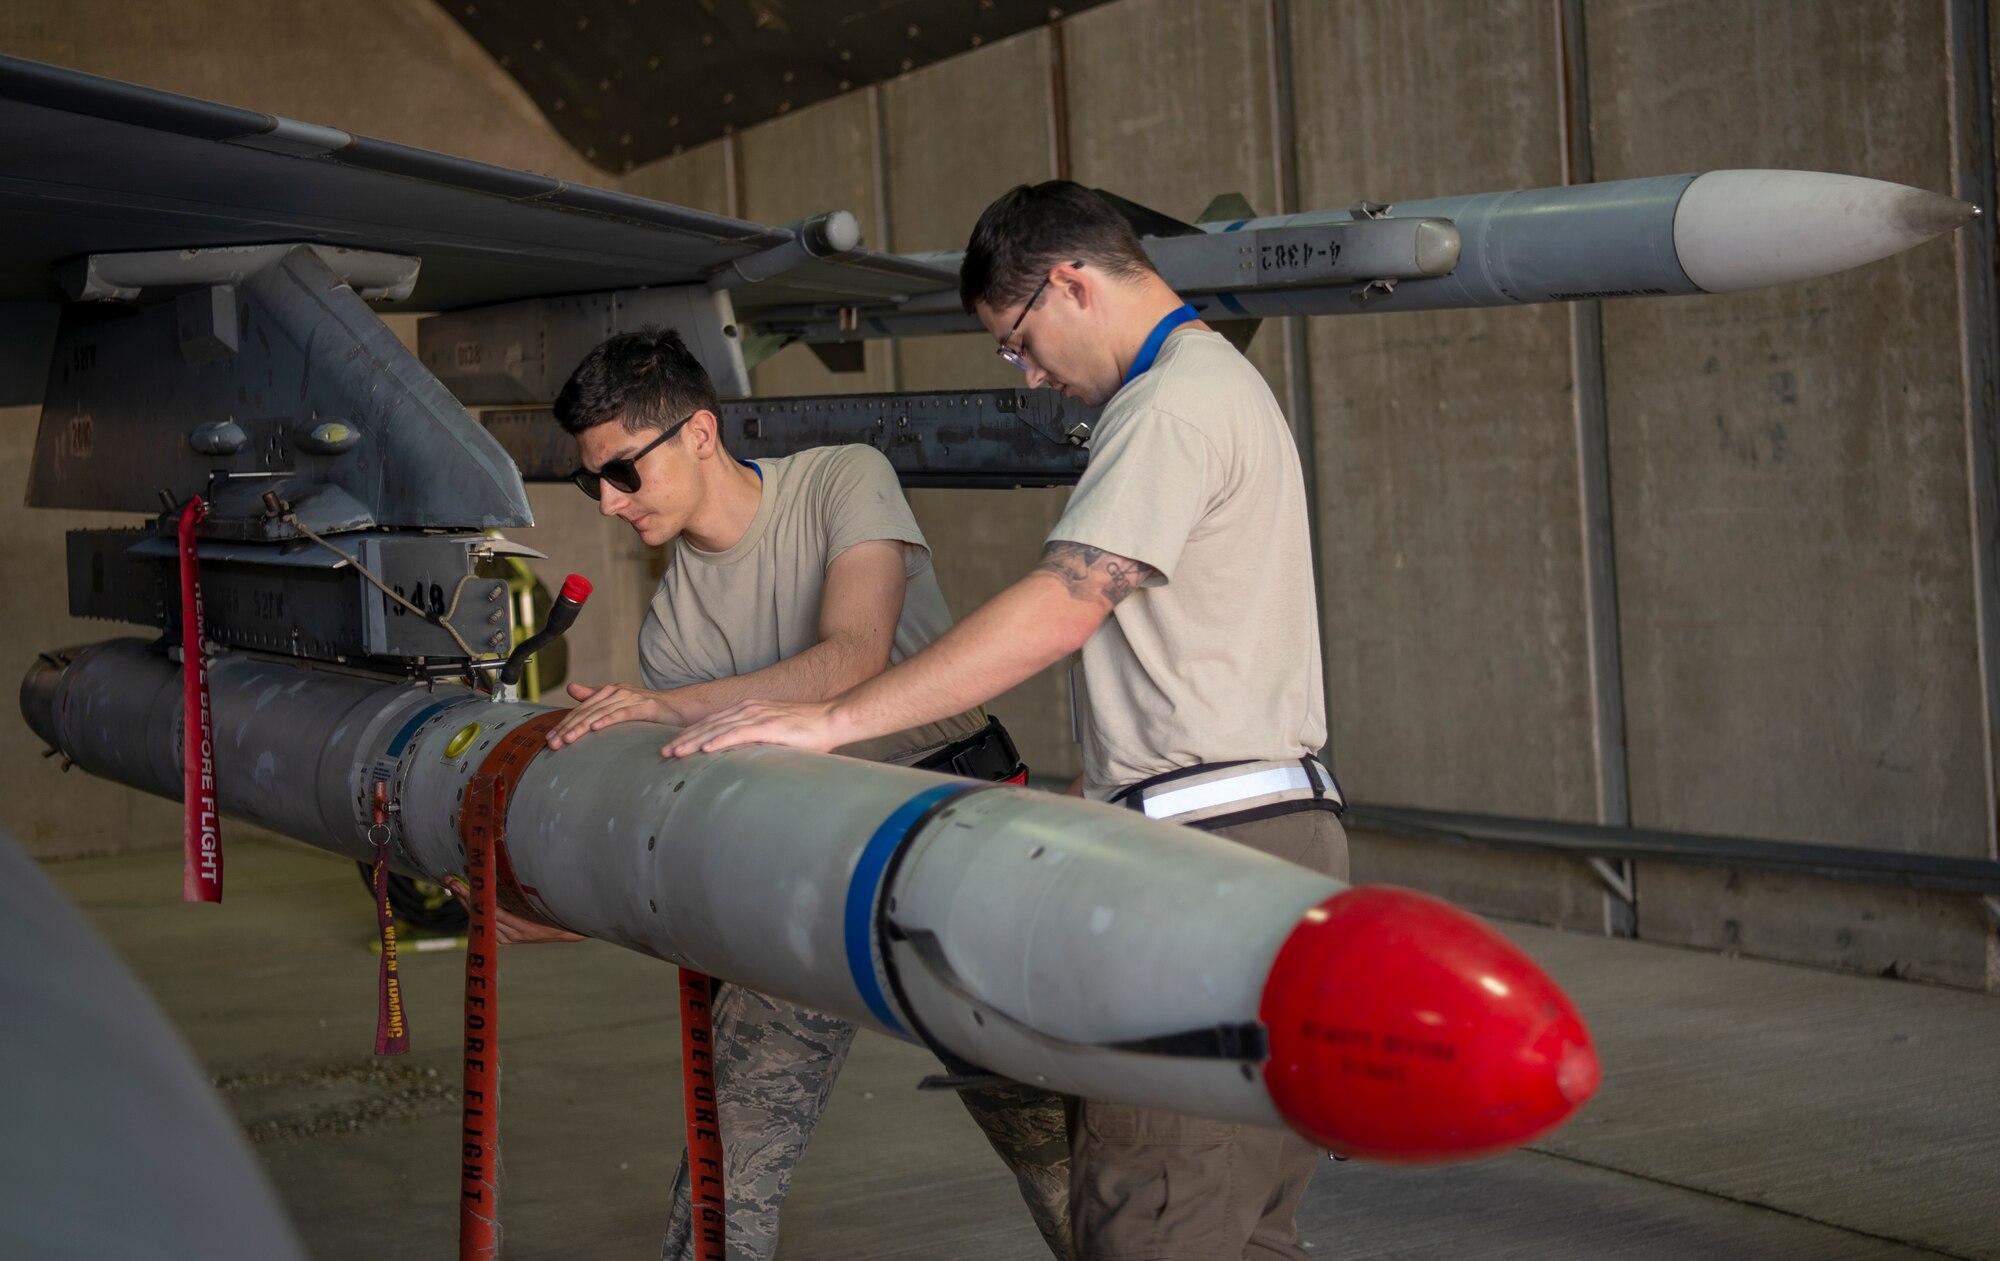 U.S. Air Force Airman 1st Class Matthew Rondon, 52nd Aircraft Maintenance Squadron weapons load two-man crew member, left, and Staff Sgt. Andrew Grimes, 52nd AMXS weapons load crew team chief, right, prepare to offload an inert missile from an F-16 Fighting Falcon at Uvda Air Base, Israel, November 5, 2019.